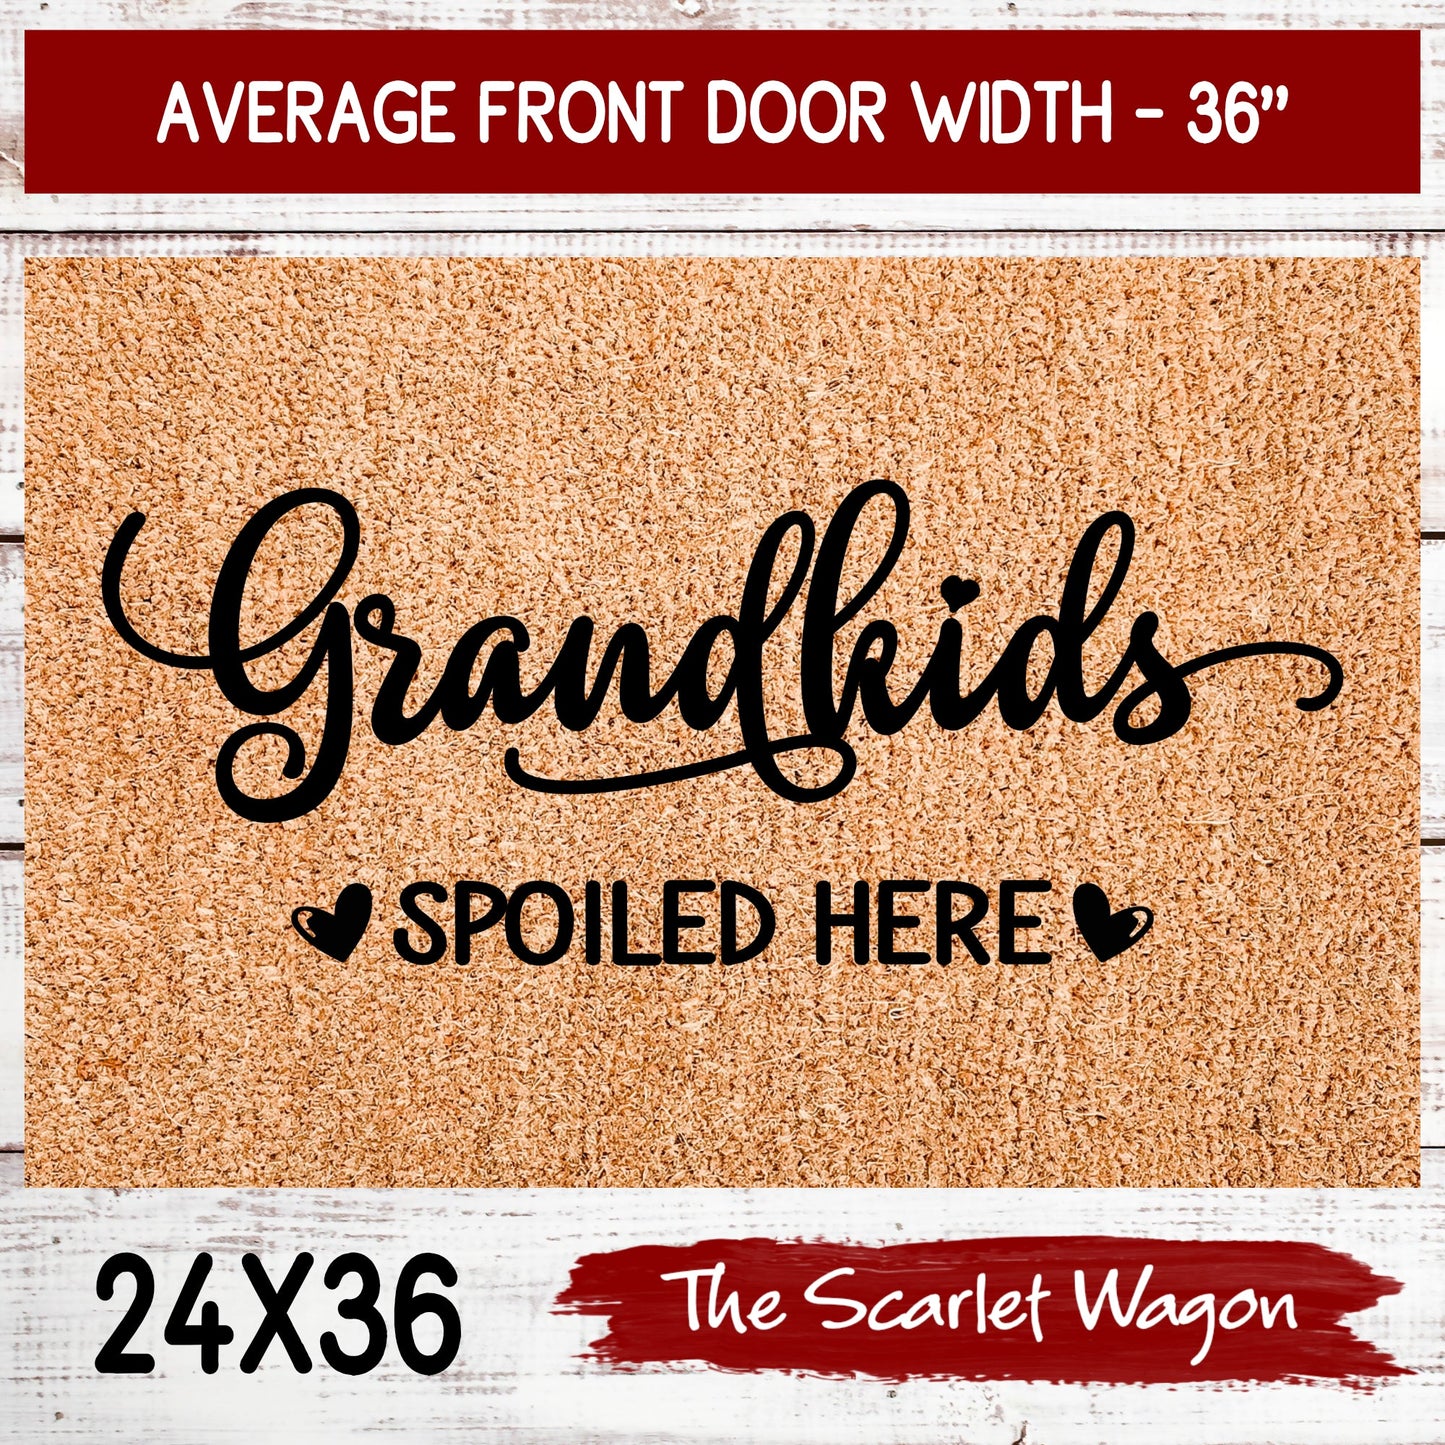 Grandkids Spoiled Here Door Mats teelaunch 24x36 Inches (Free Shipping) 